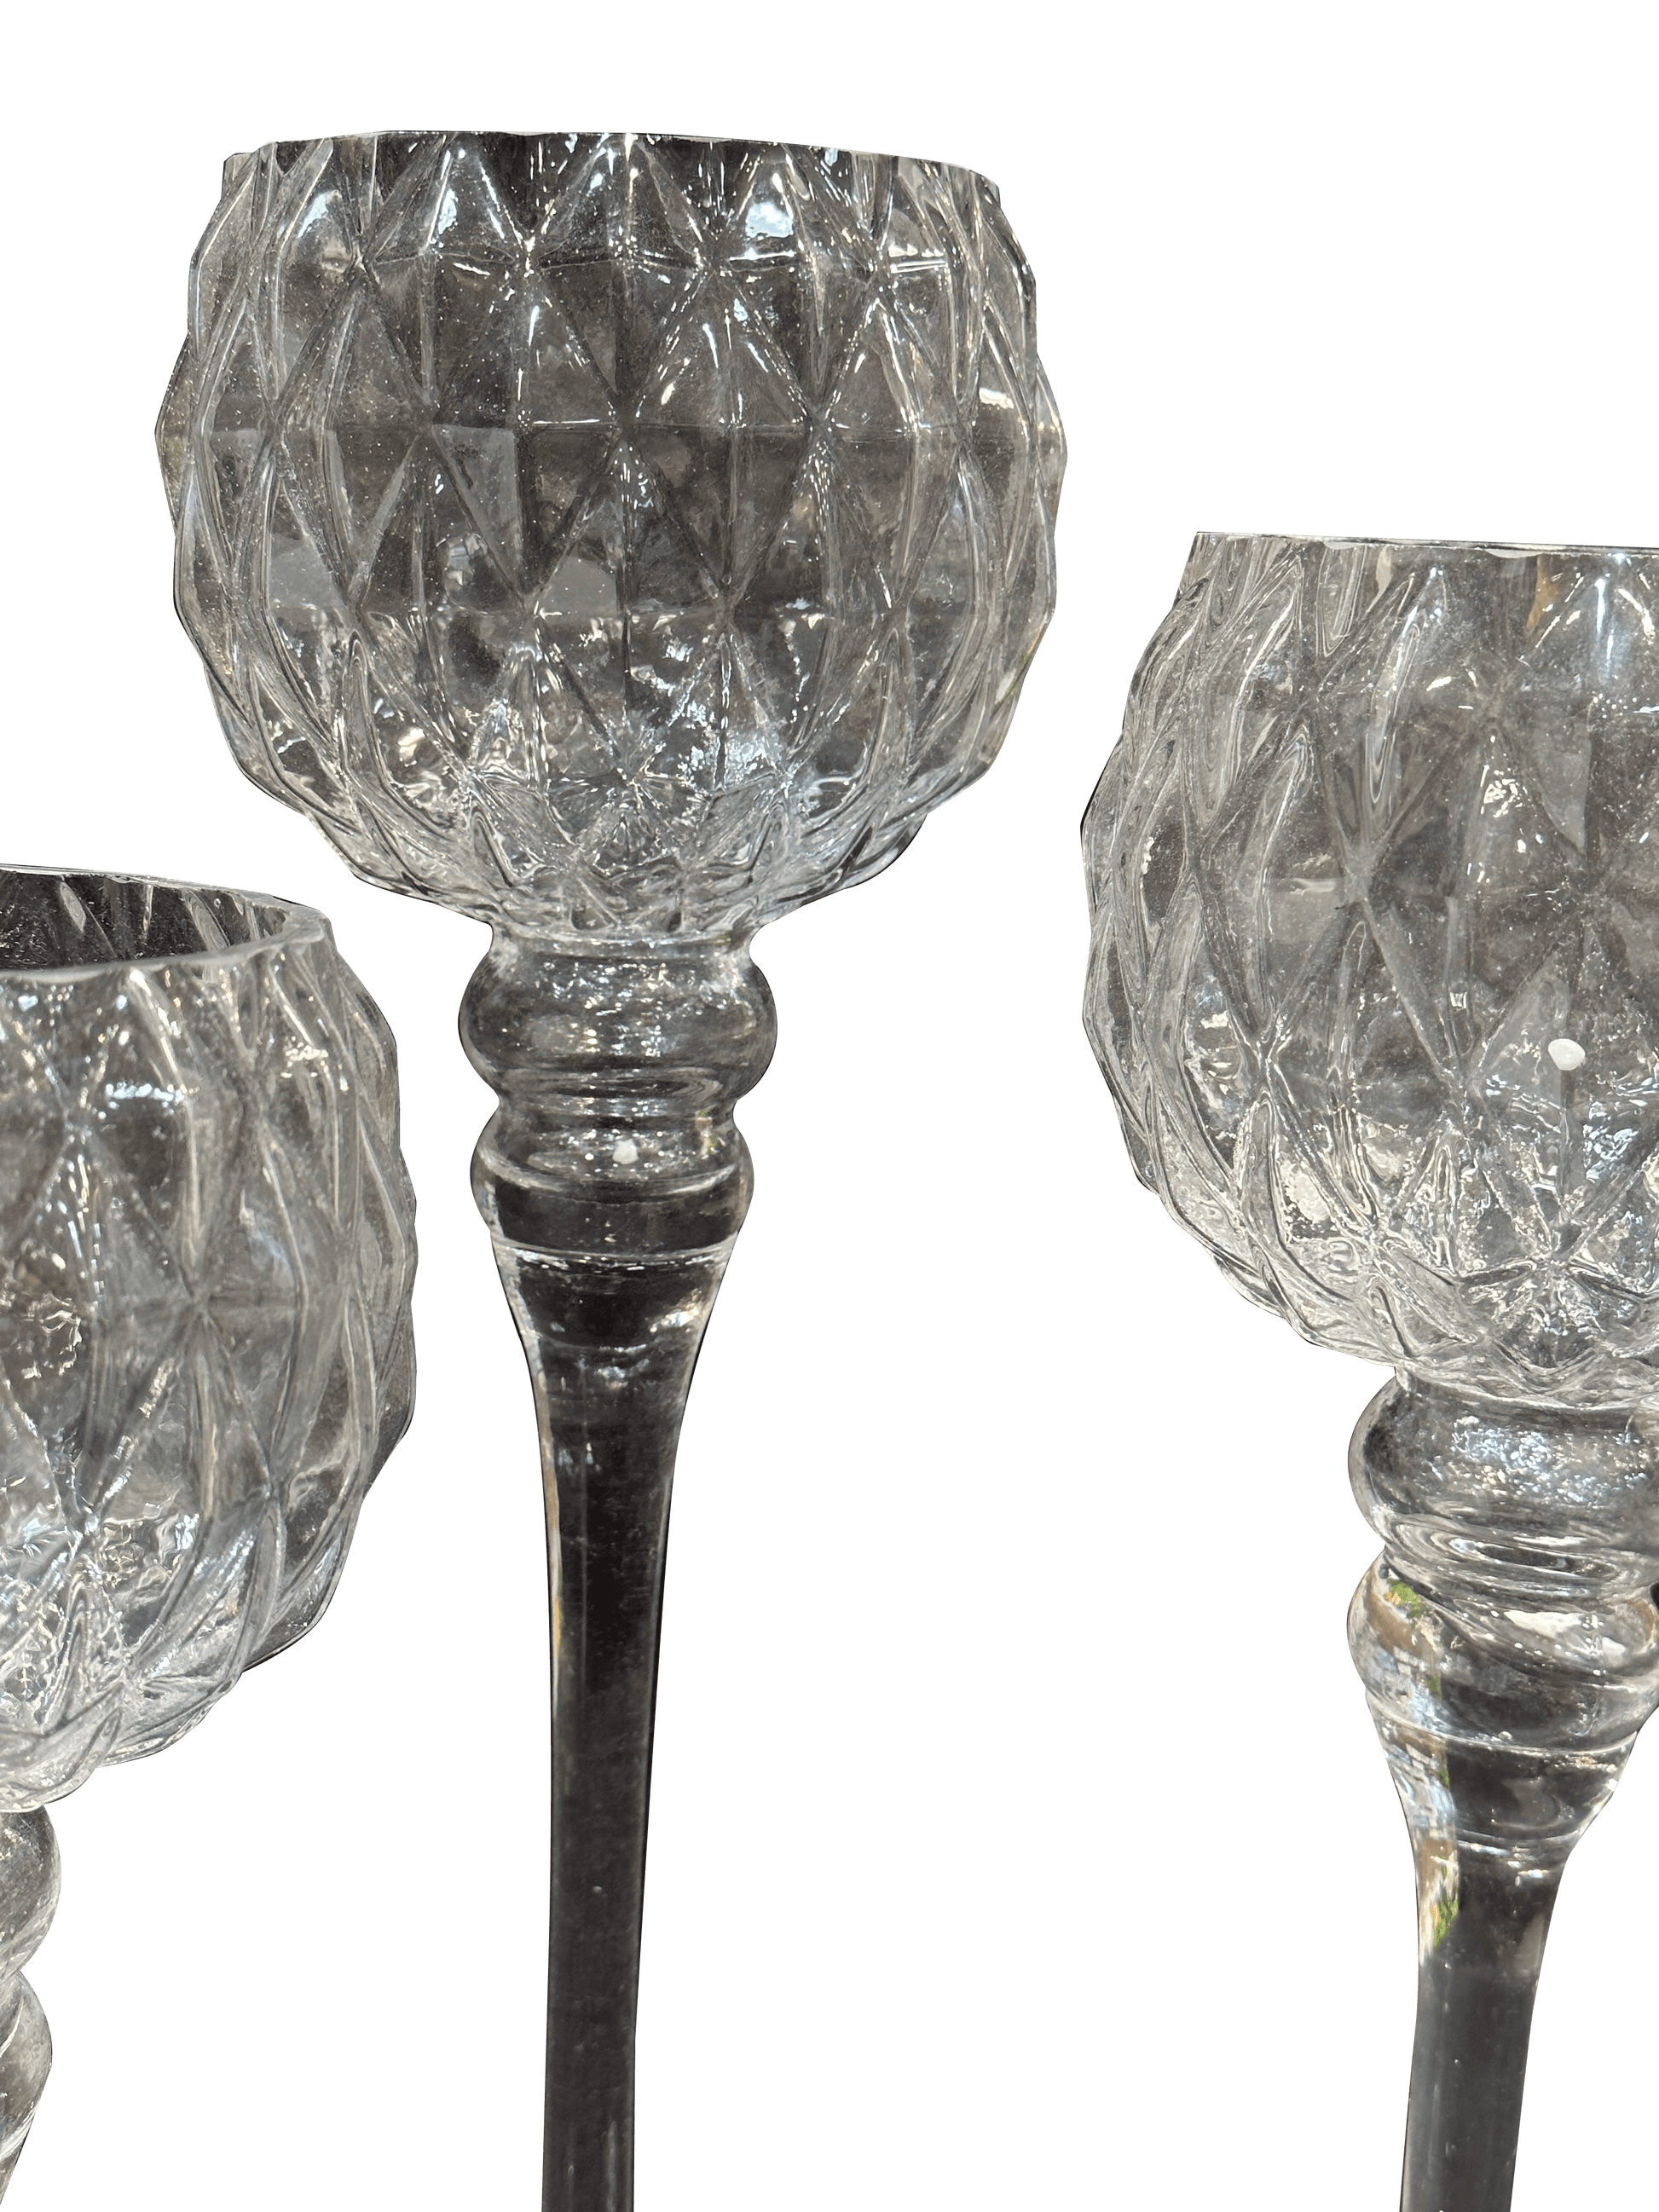 Three Pieces Crystal Decor Set - Sunset Gifts Store